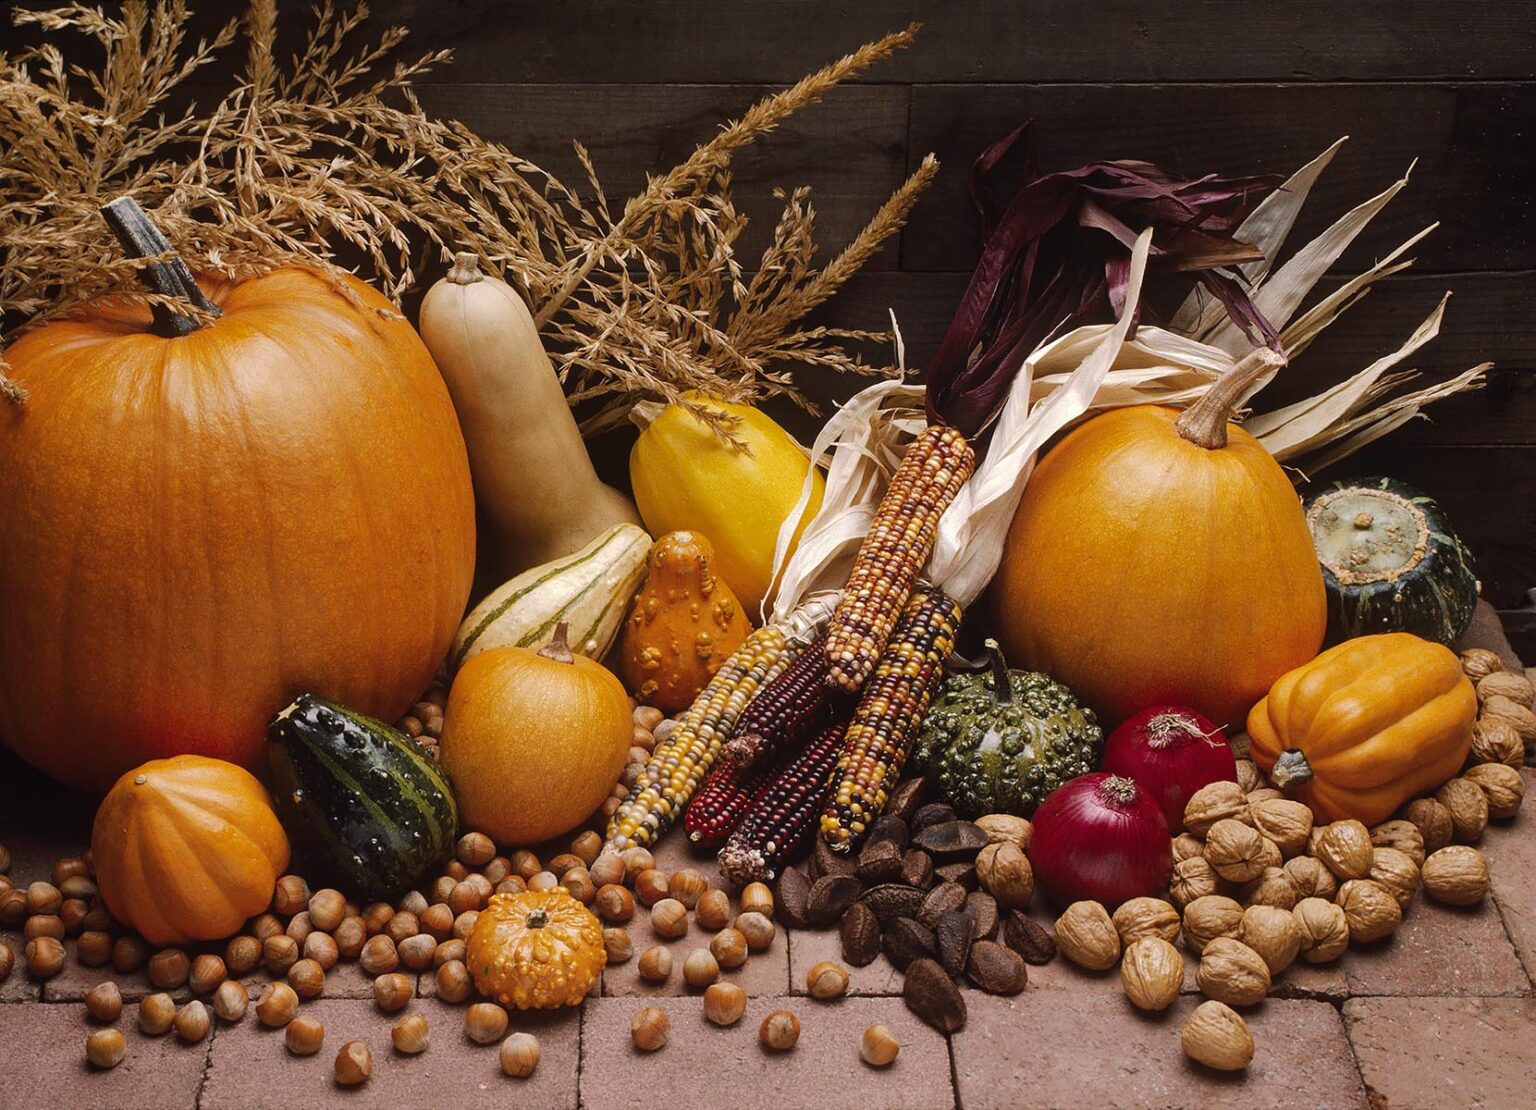 Fall harvest of PUMPKINS, GOURDS, ONIONS, SQUASH, INDIAN CORN and mixed NUTS